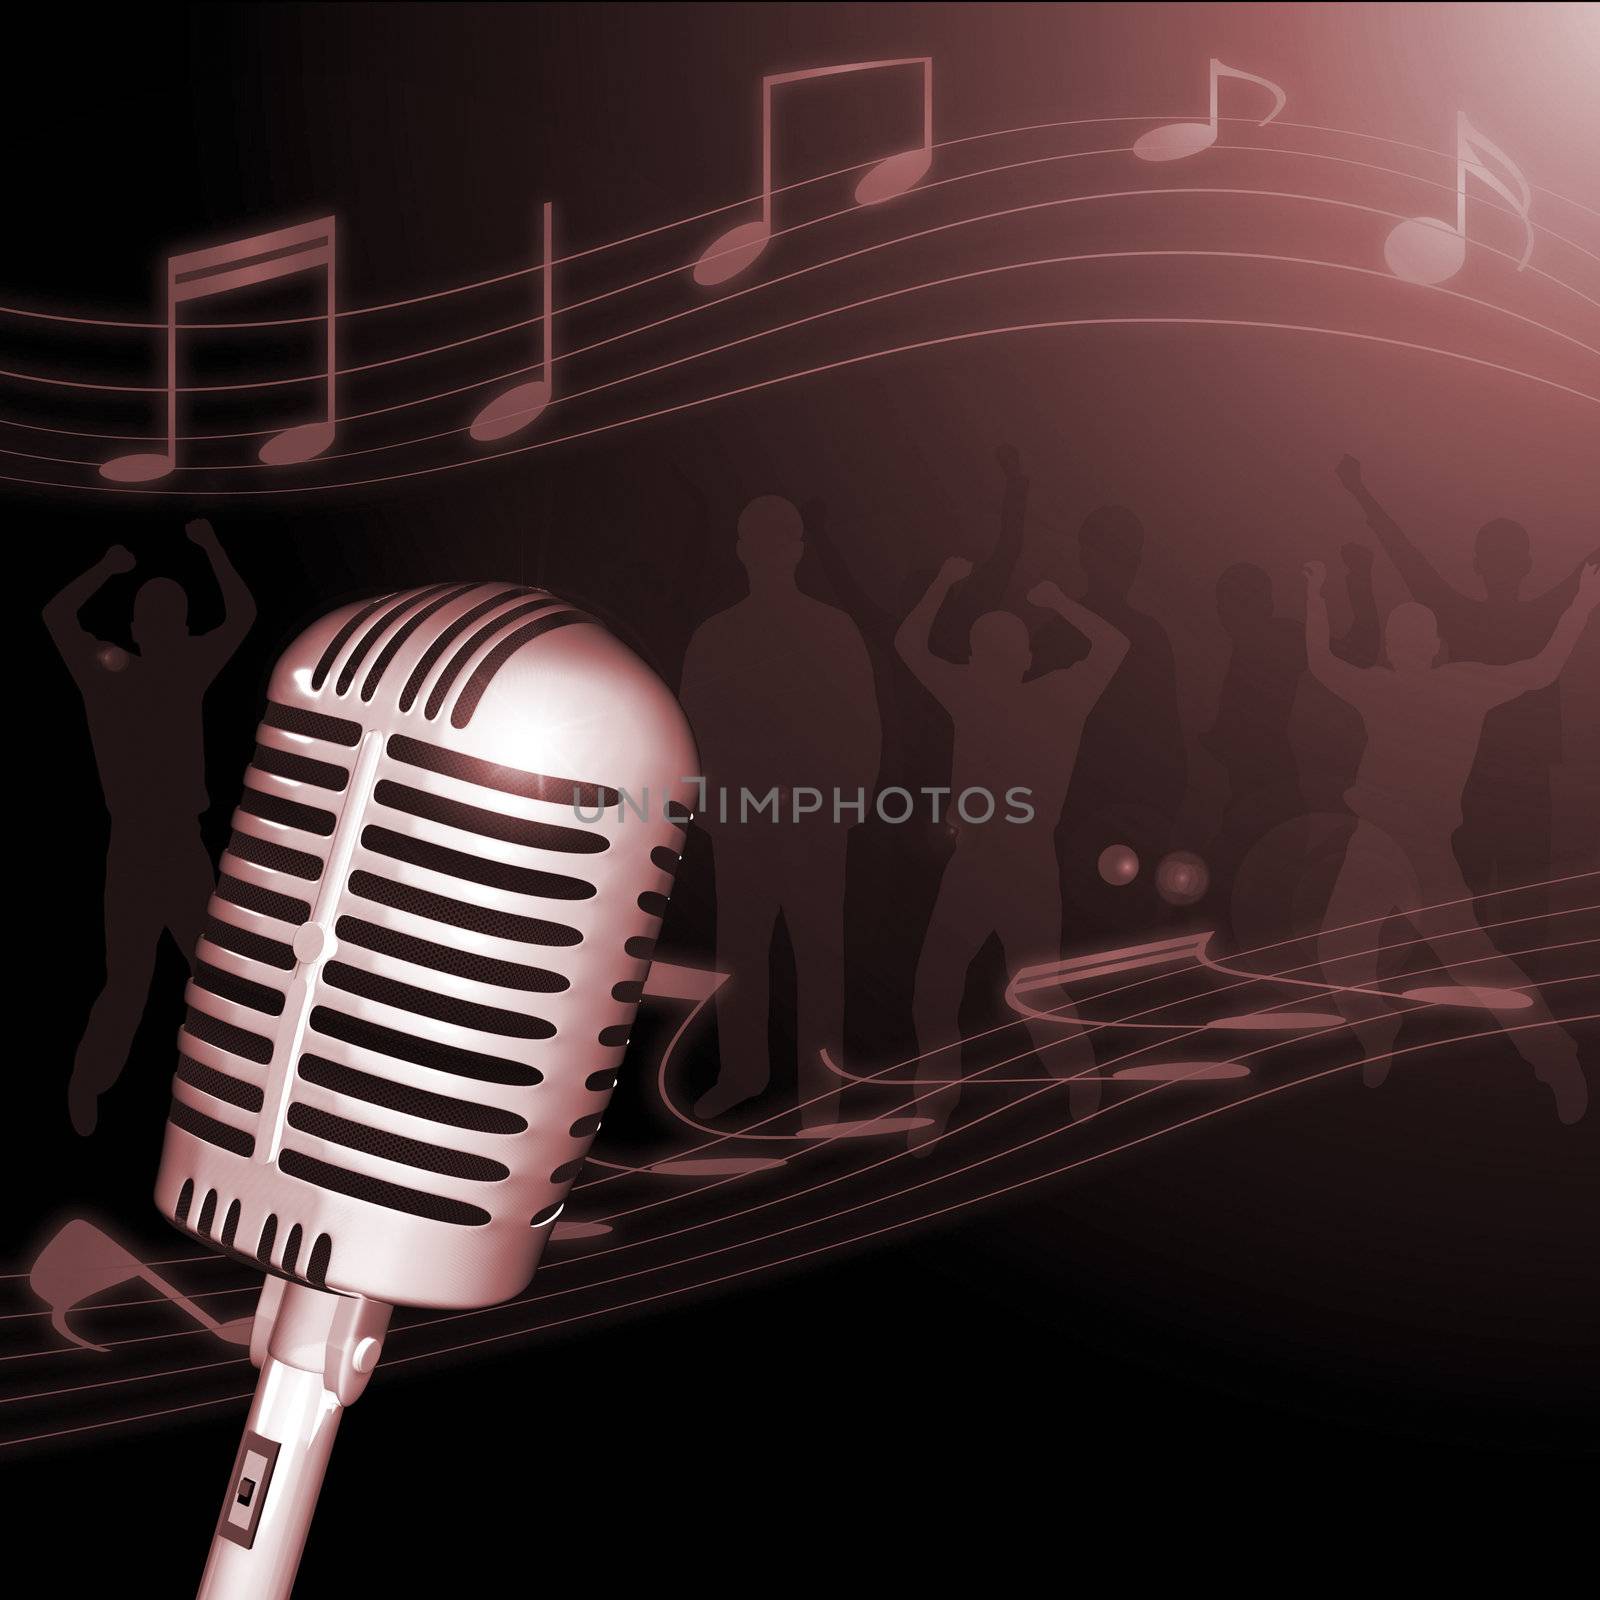 Image of a retro microphone with musical notes and crowd in the background.